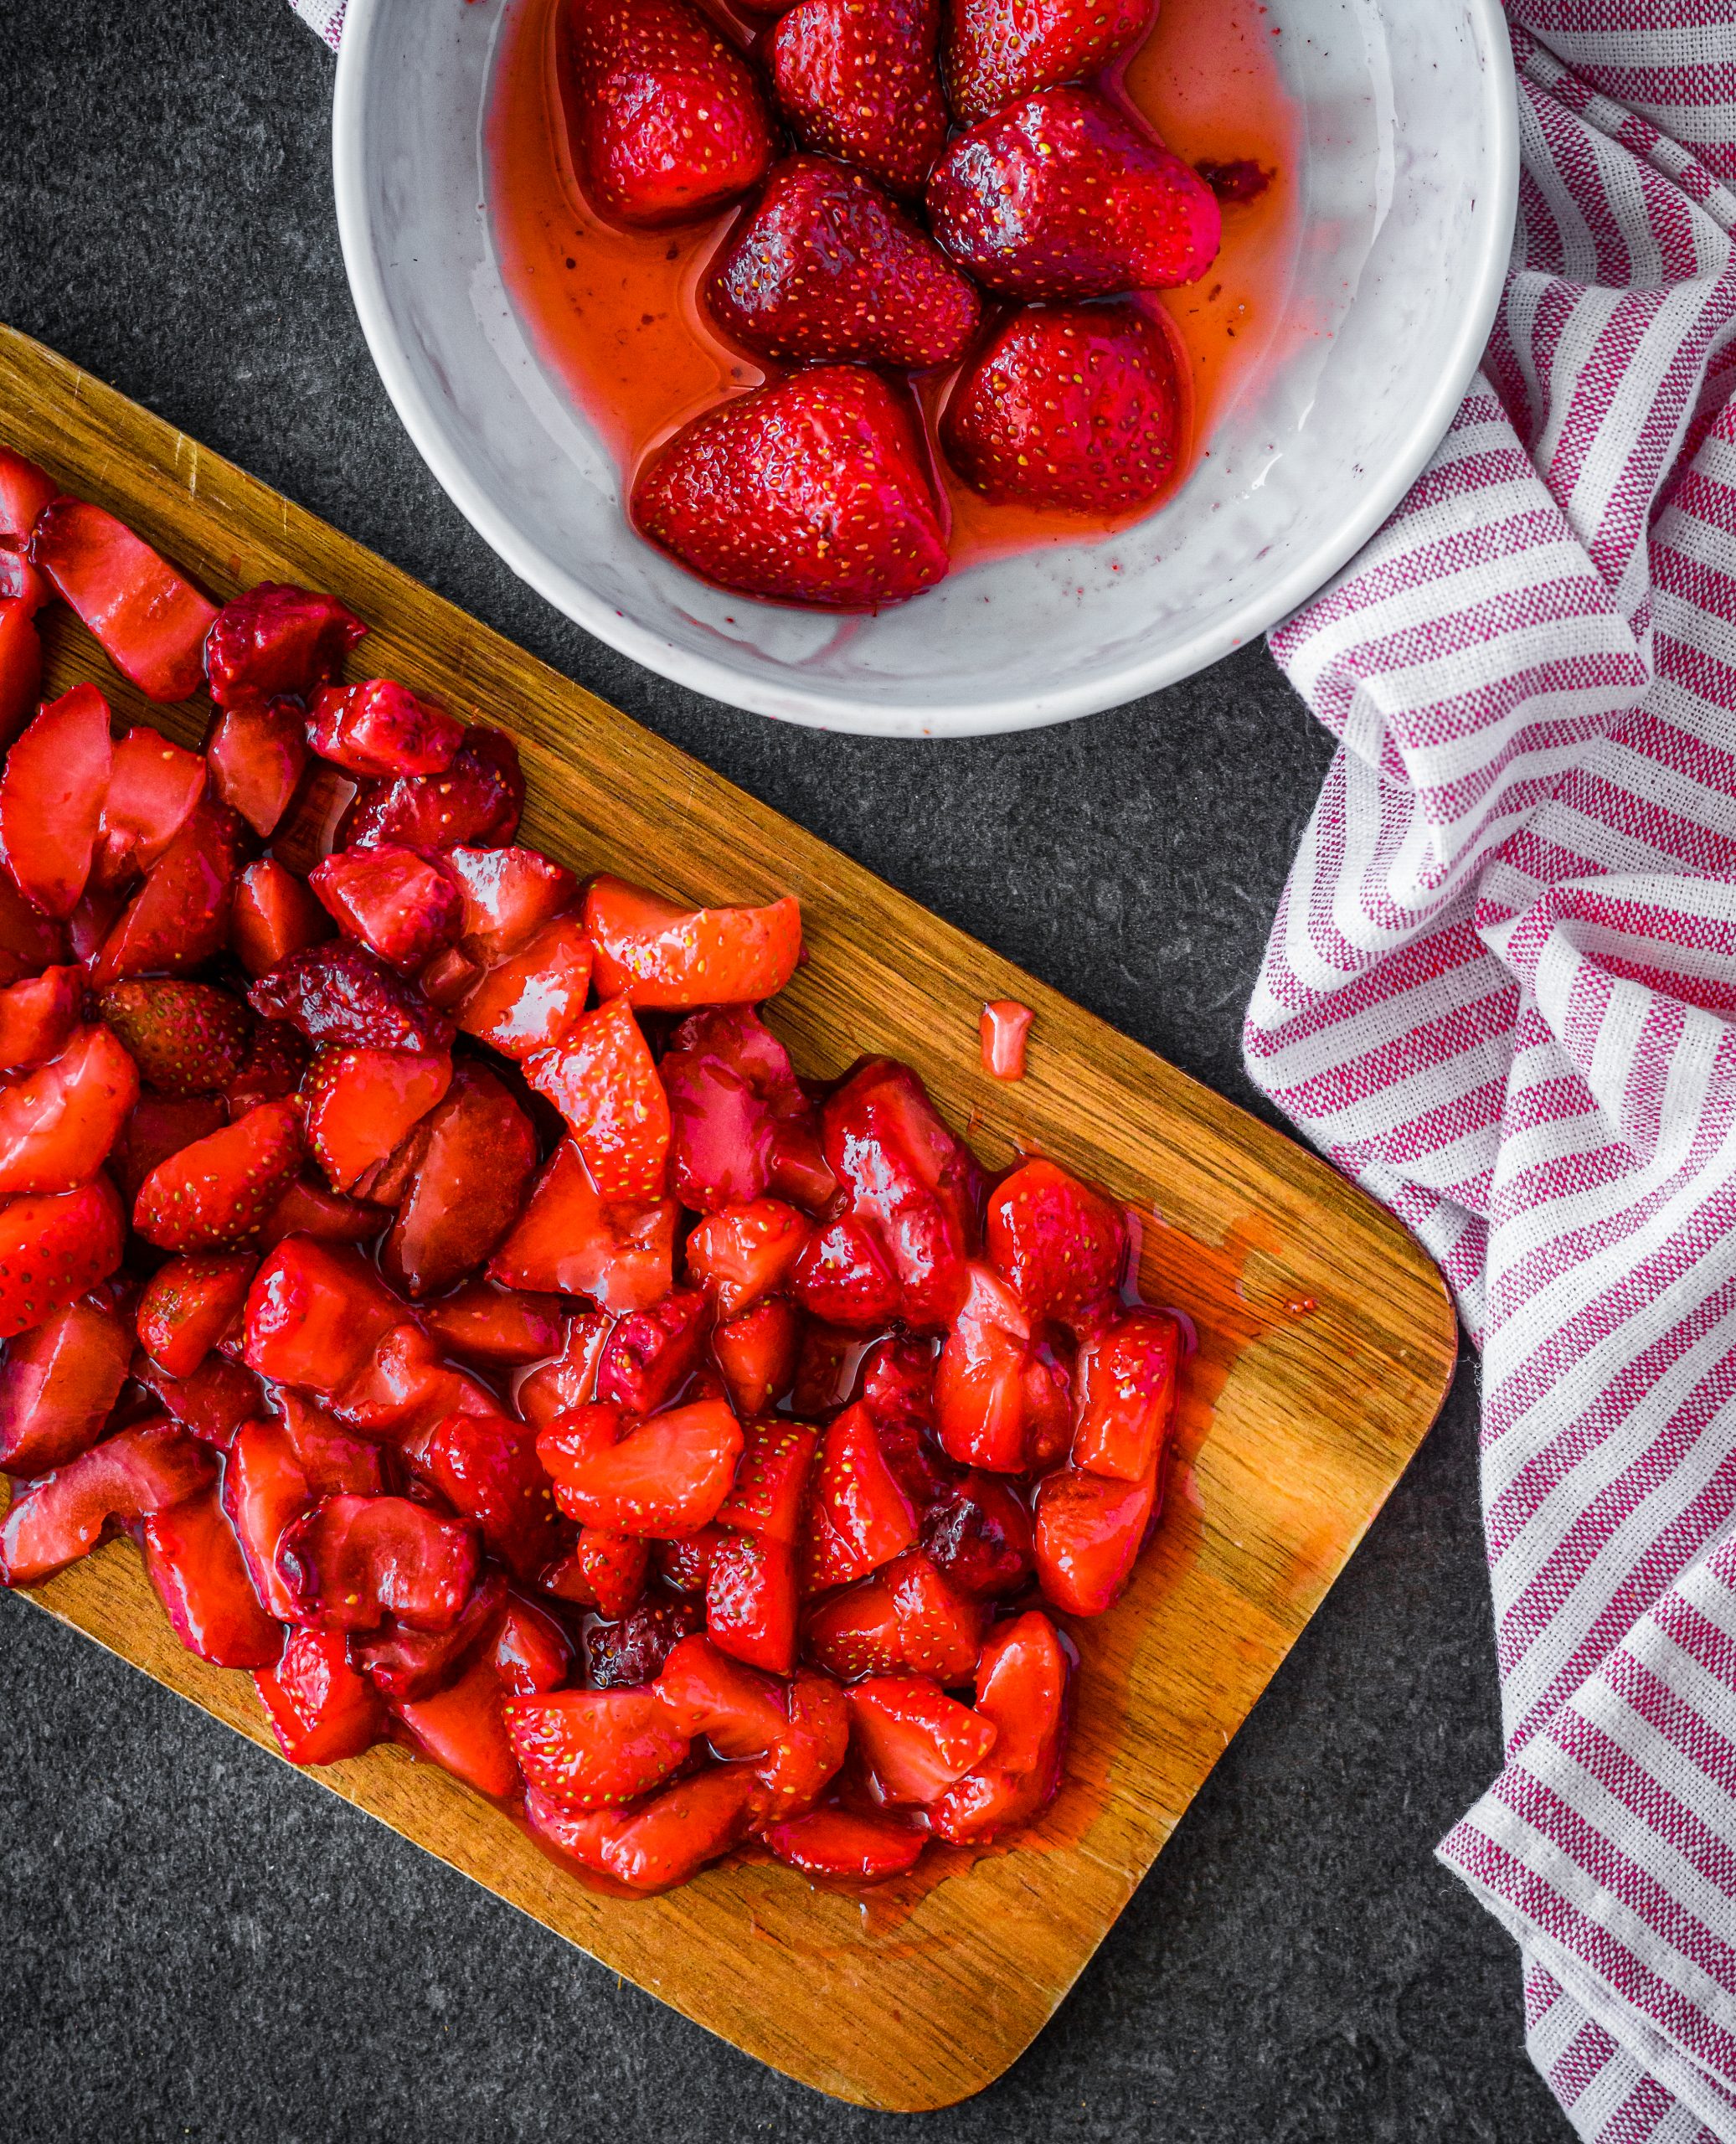 Chop the strawberries and set aside. 